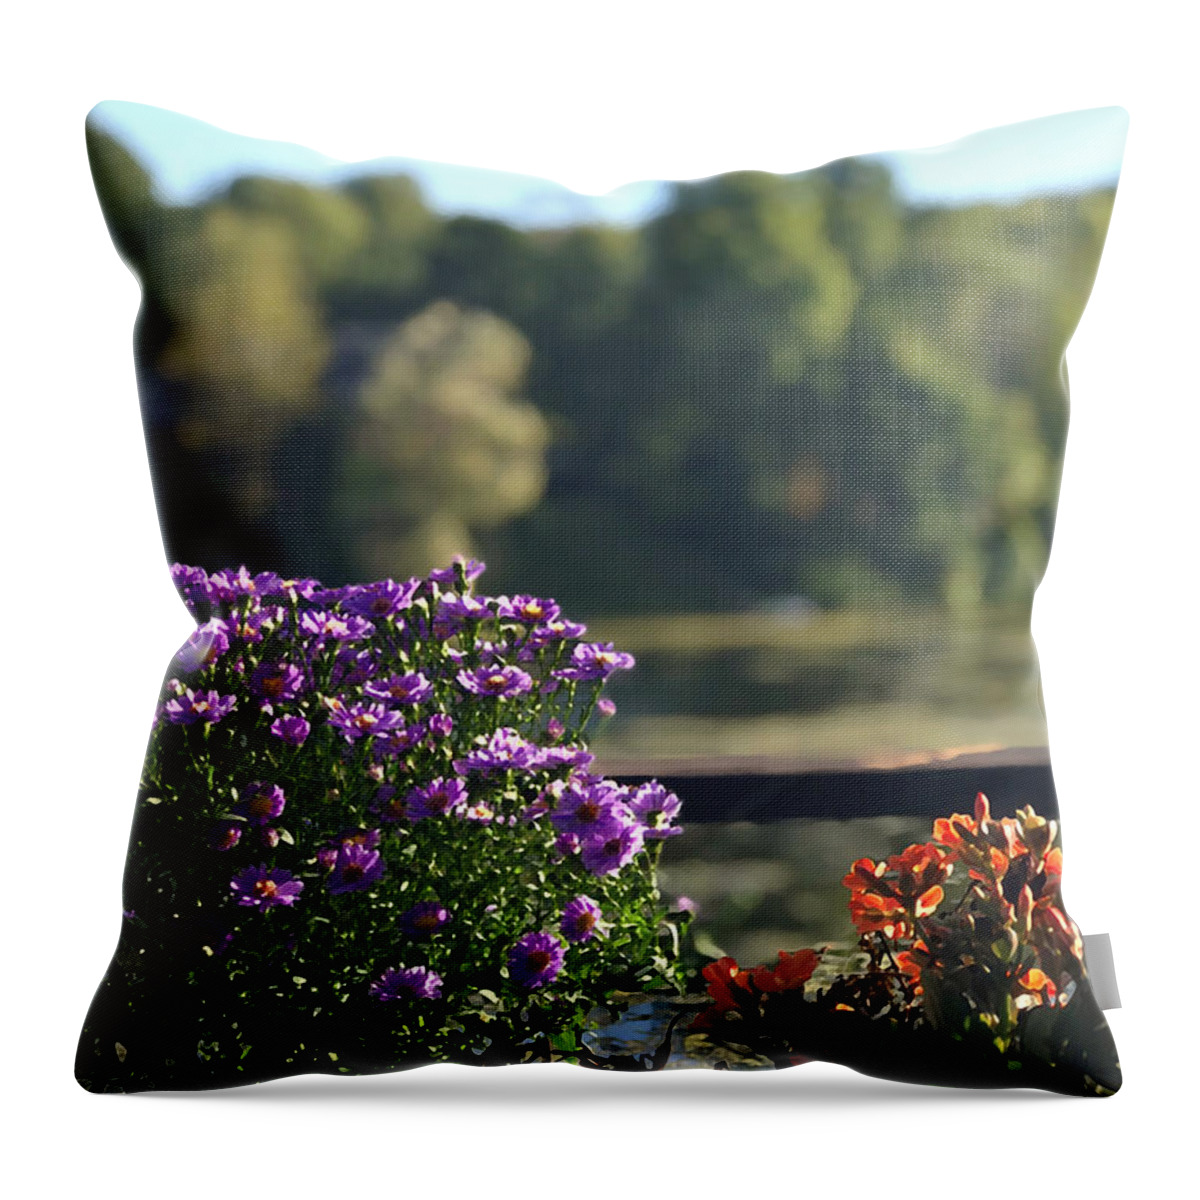 Flowers Throw Pillow featuring the photograph Fall Porch by Tom Johnson